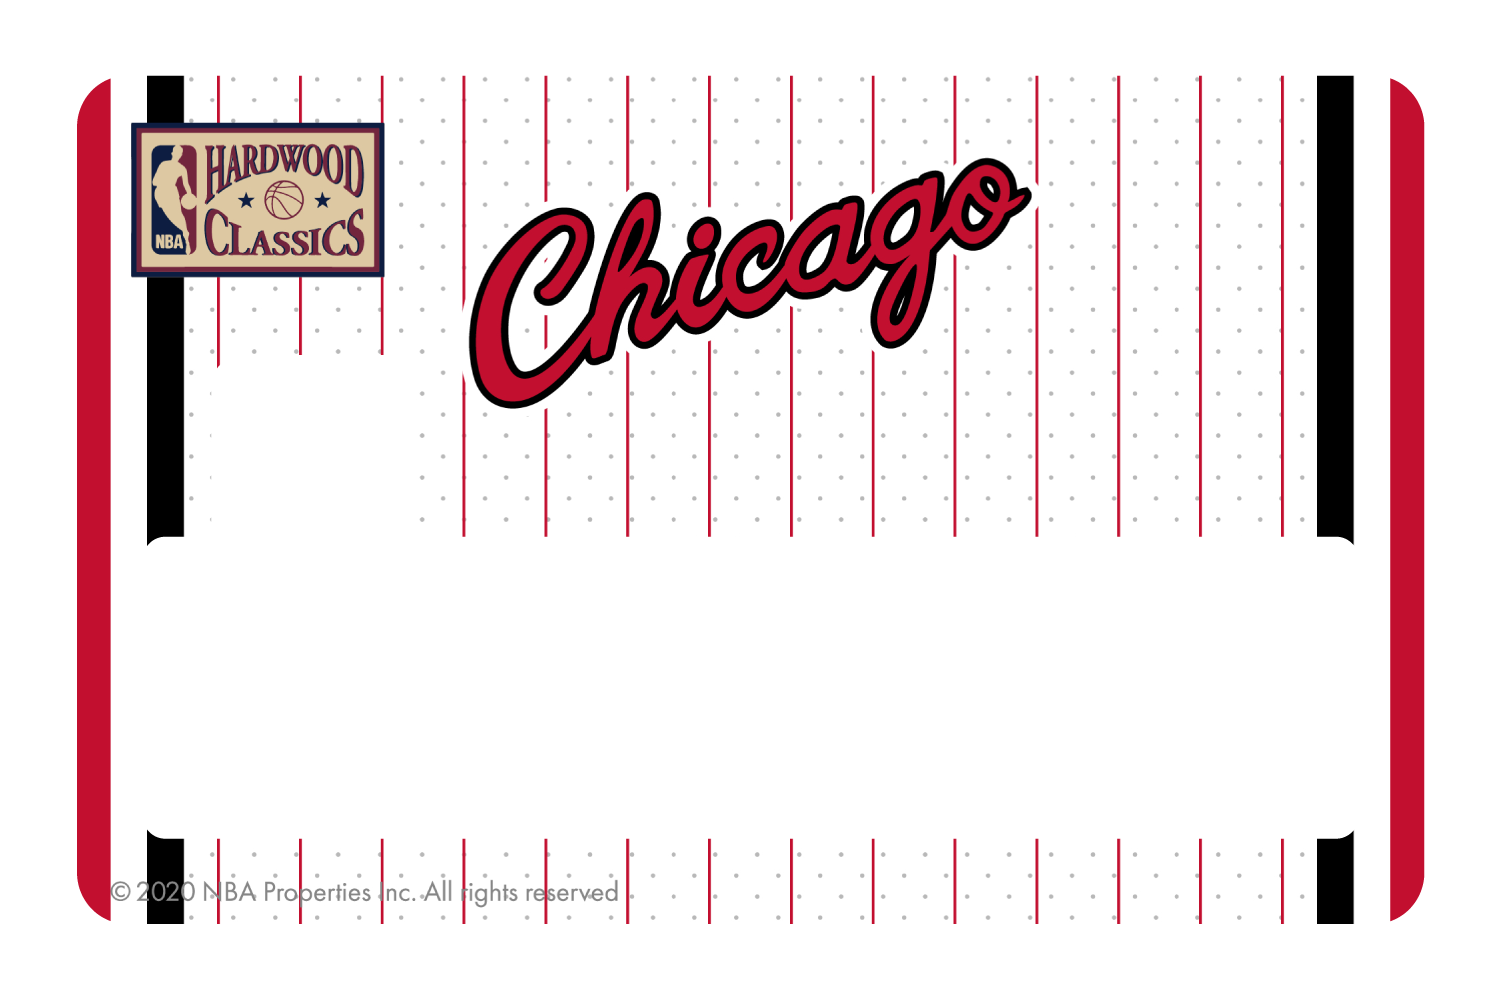 Credit Debit Card Skins | Cucu Covers - Customize Any Bank Card - Chicago Bulls: Retro Courtside Hardwood Classics Half Cover / Small Chip